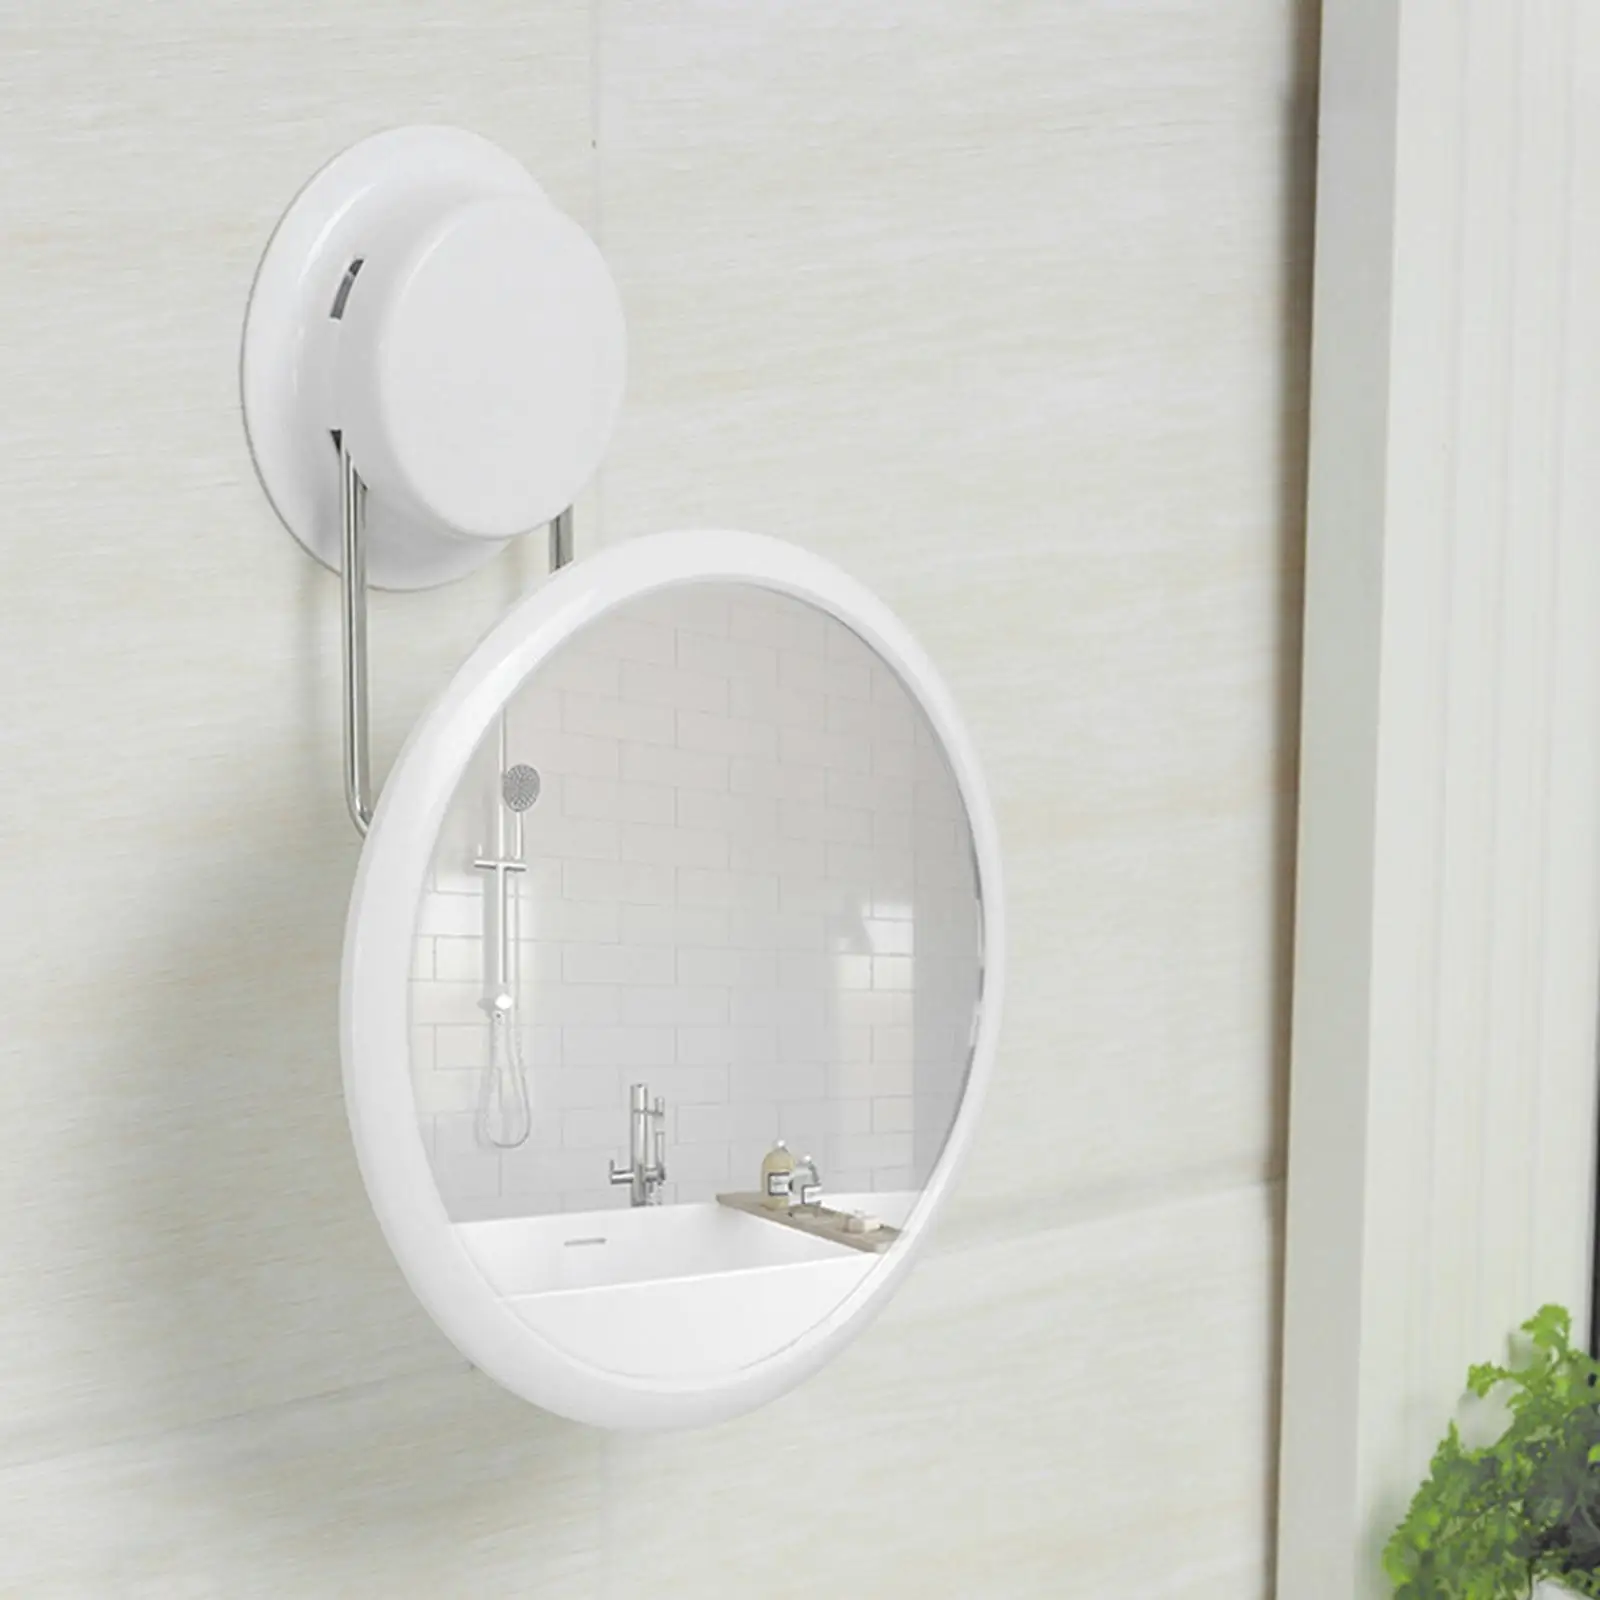 Home Wall Suction Bathroom Mirror Folding Rotatable No Nails Waterproof Polished And Smooth  Mirror Beauty Mirror